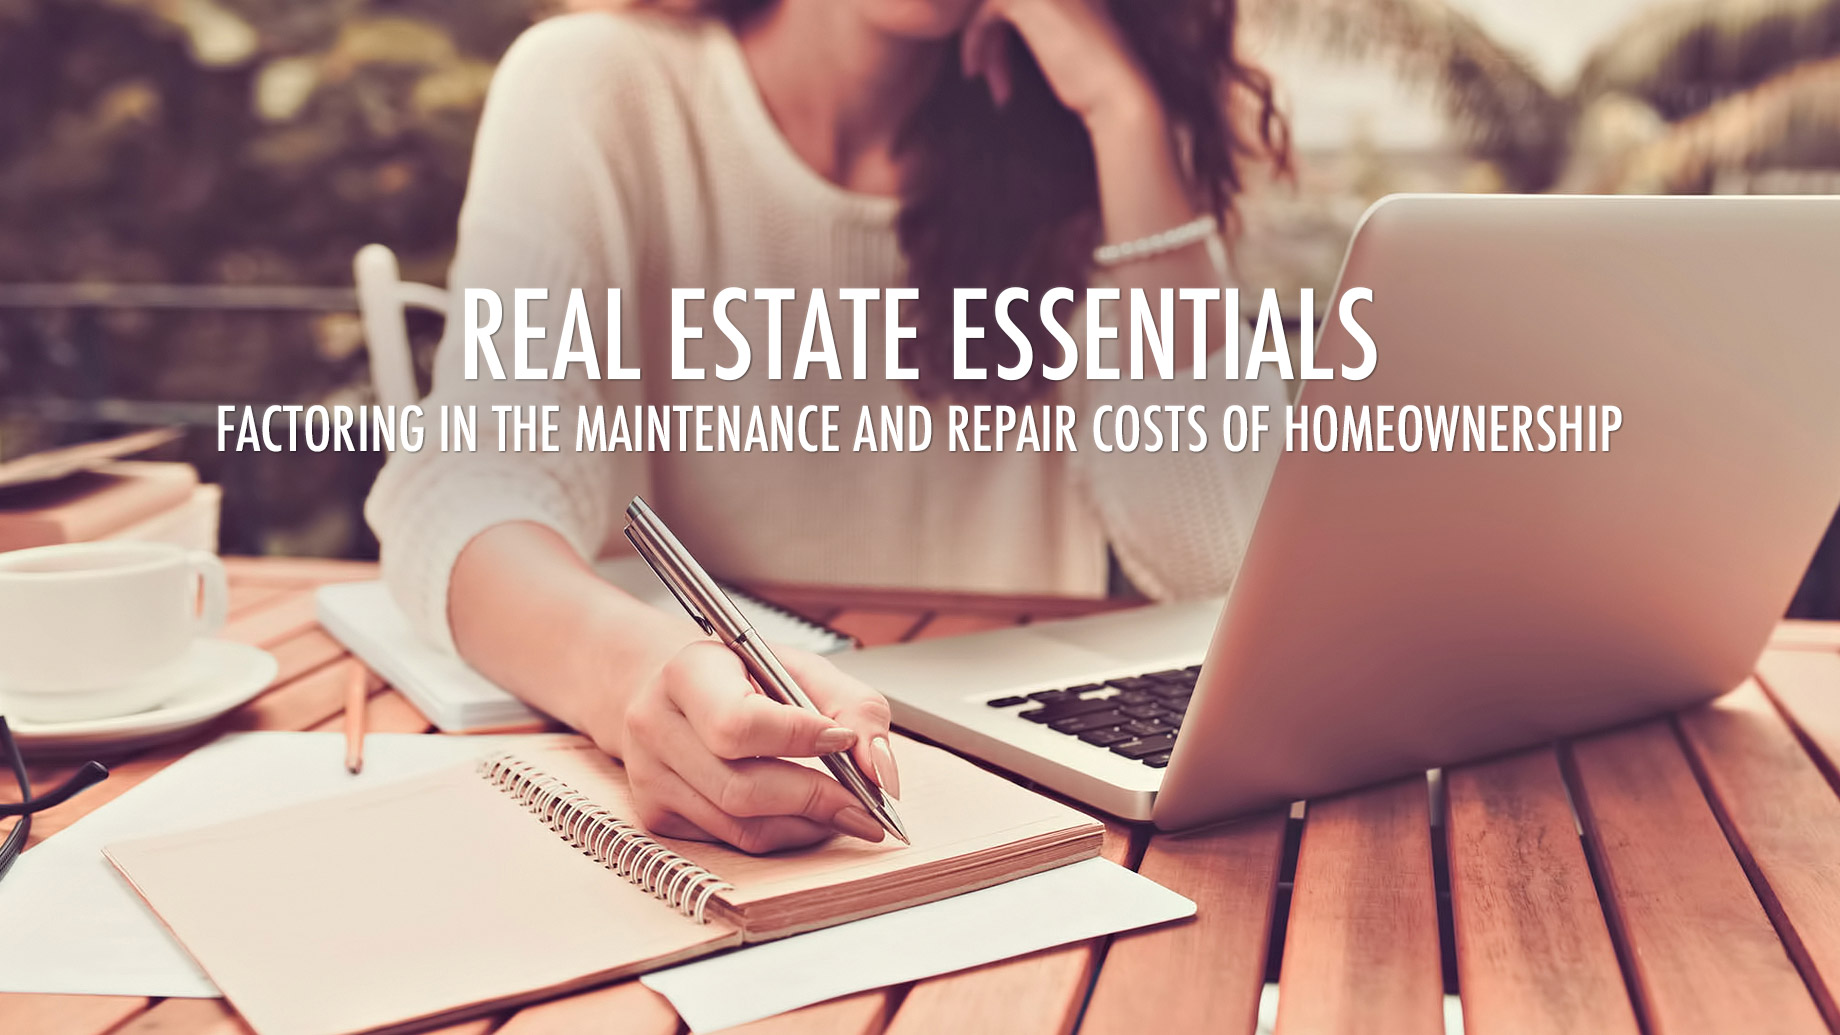 Real Estate Essentials - Factoring In The Maintenance and Repair Costs of Homeownership